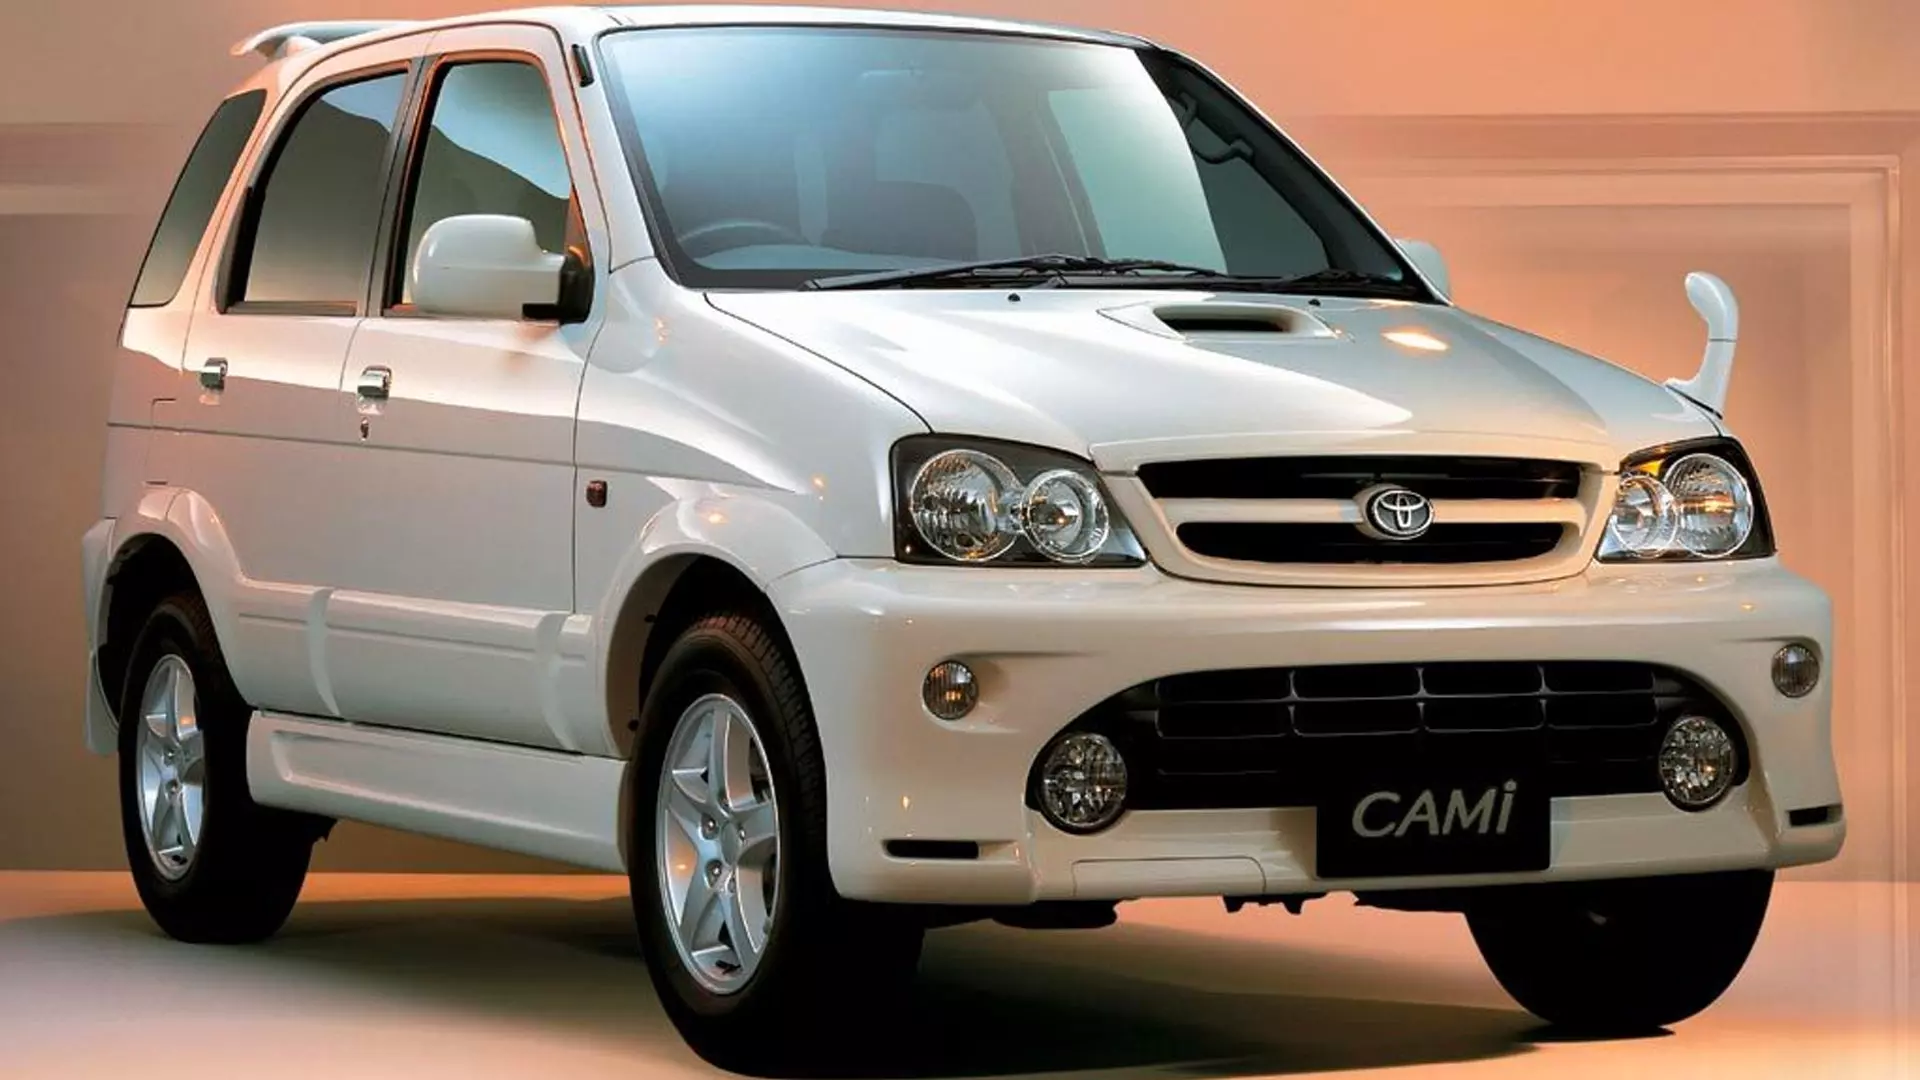 Get a Daihatsu Terios Now if You Want To Beat the Next JDM Import Hype Train